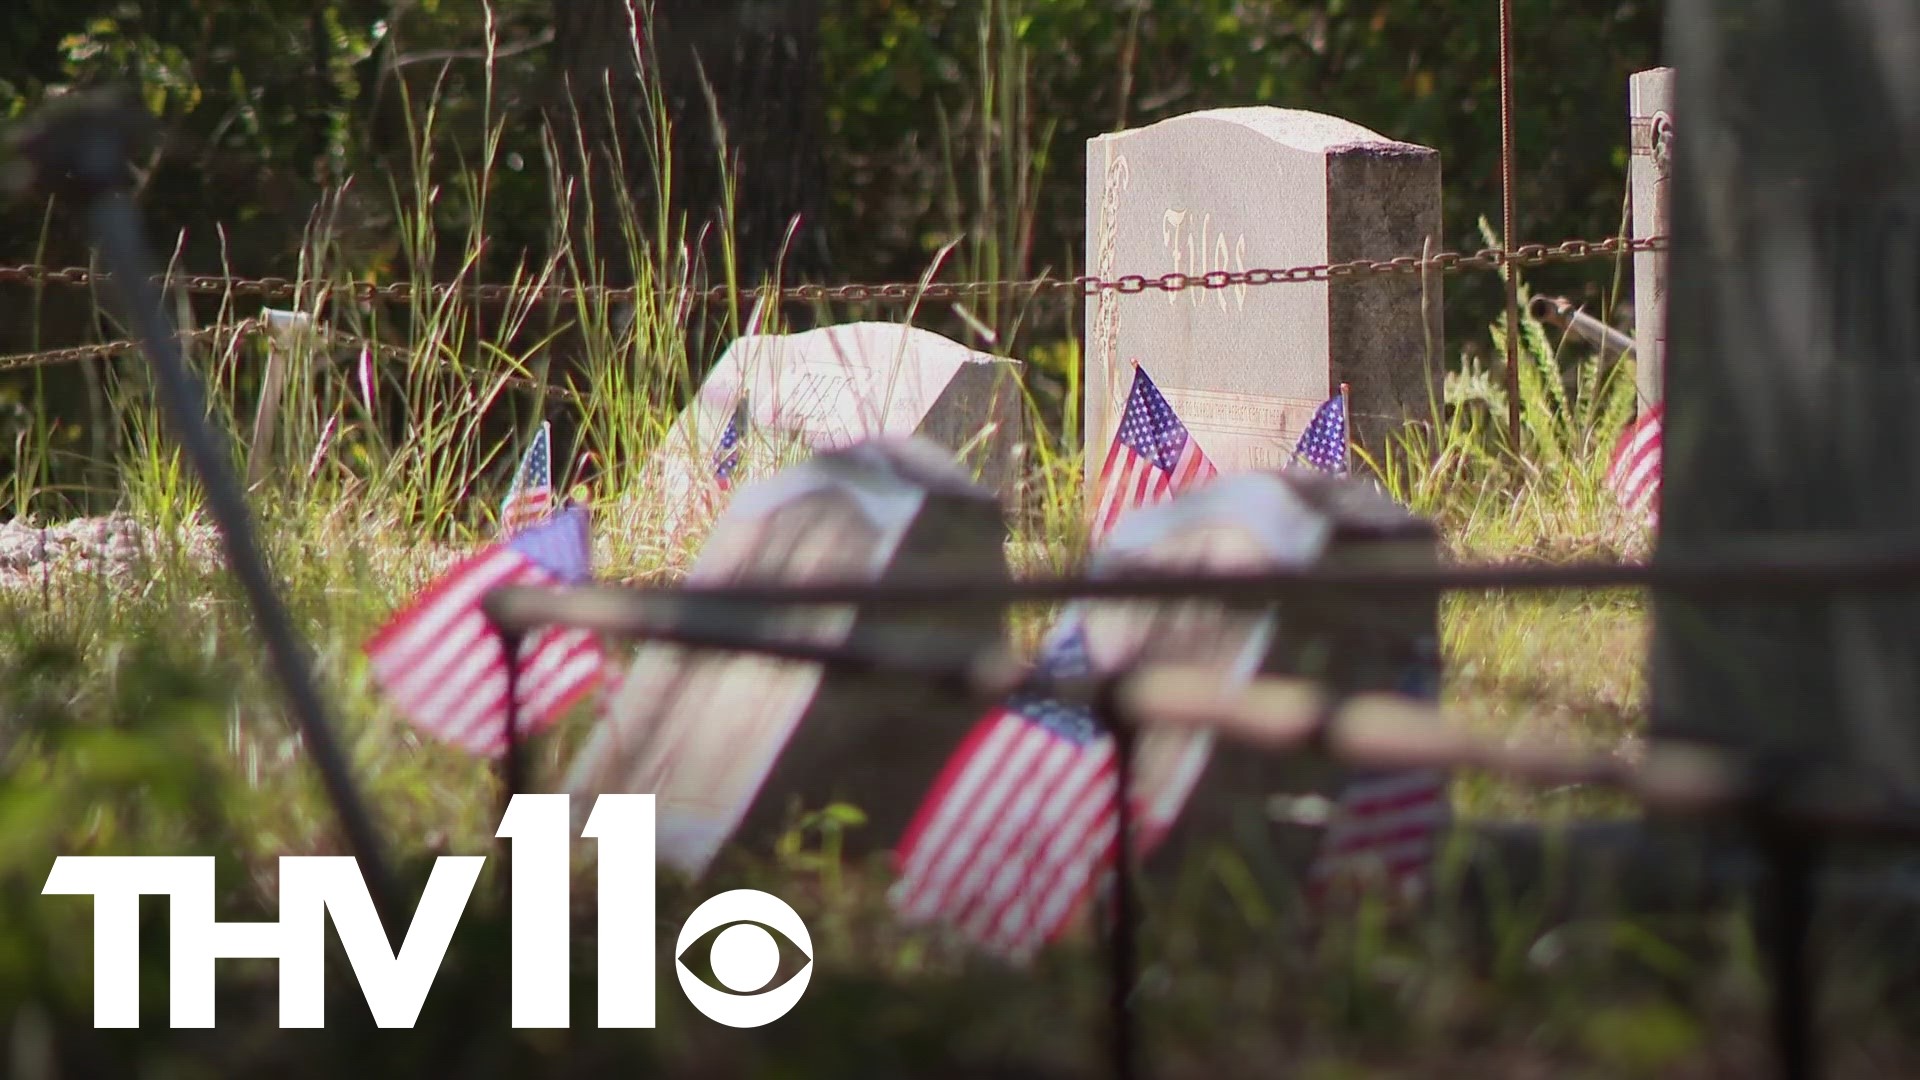 Files Cemetery in Hot Springs holds the remains of people with AIDS but recently became overgrown until a neighbor unknowingly recovered that legacy.